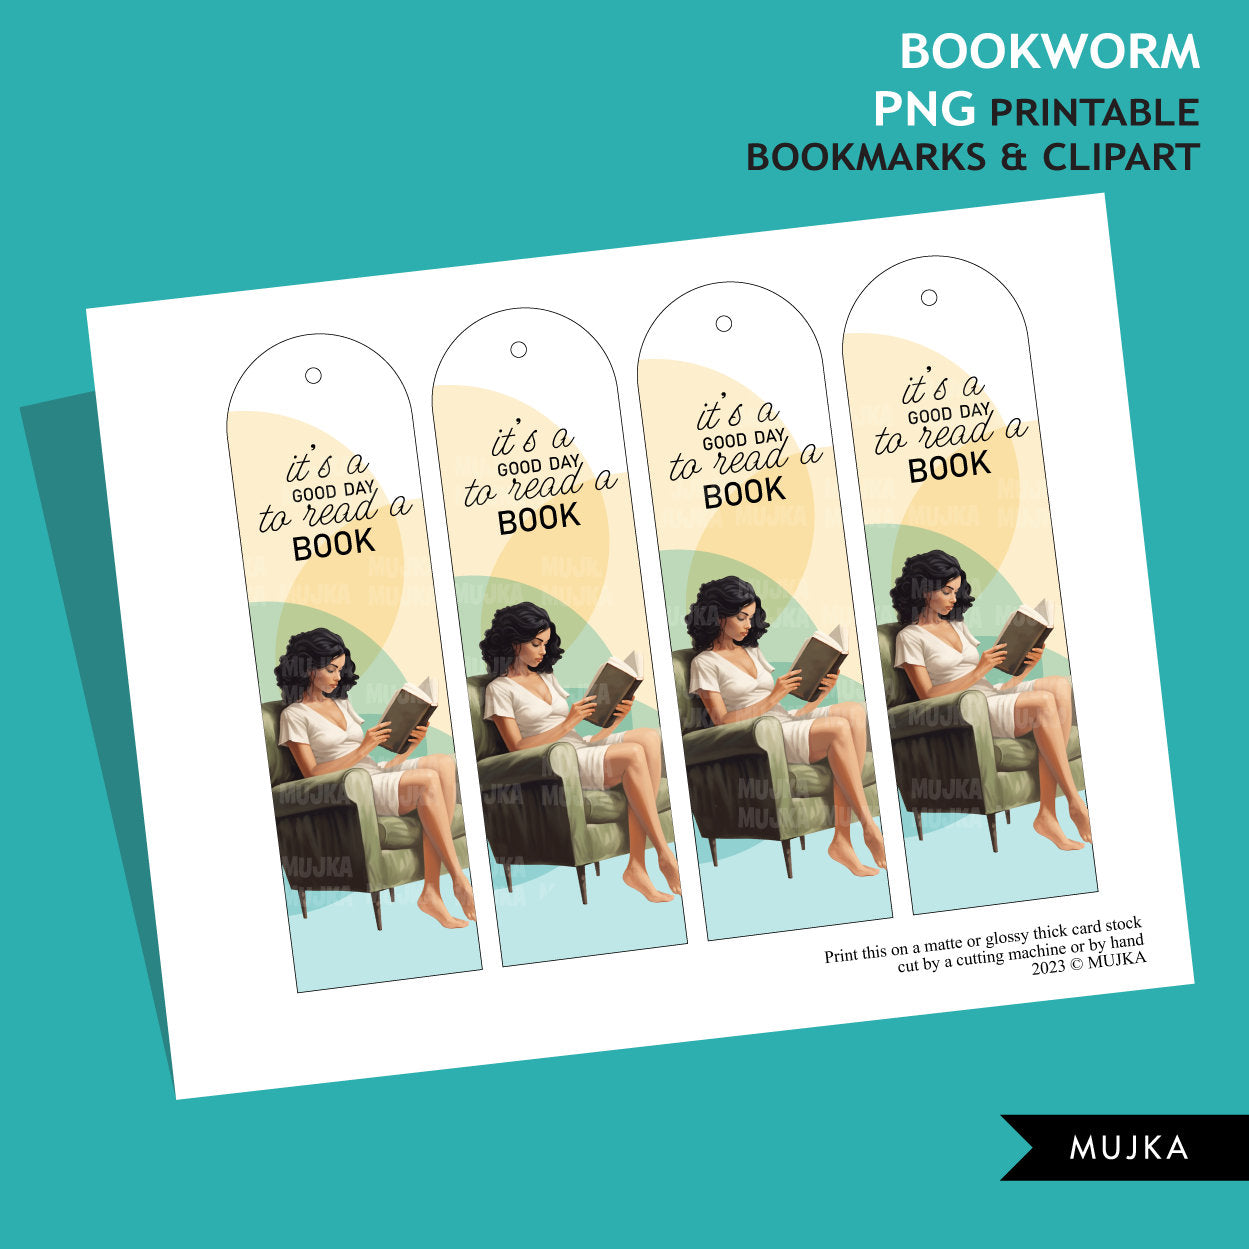 Bookworm png, Printable Bookmarks, Brunette woman reading png, Bookworm clipart, reading clipart, self care woman png, reading girl stickers